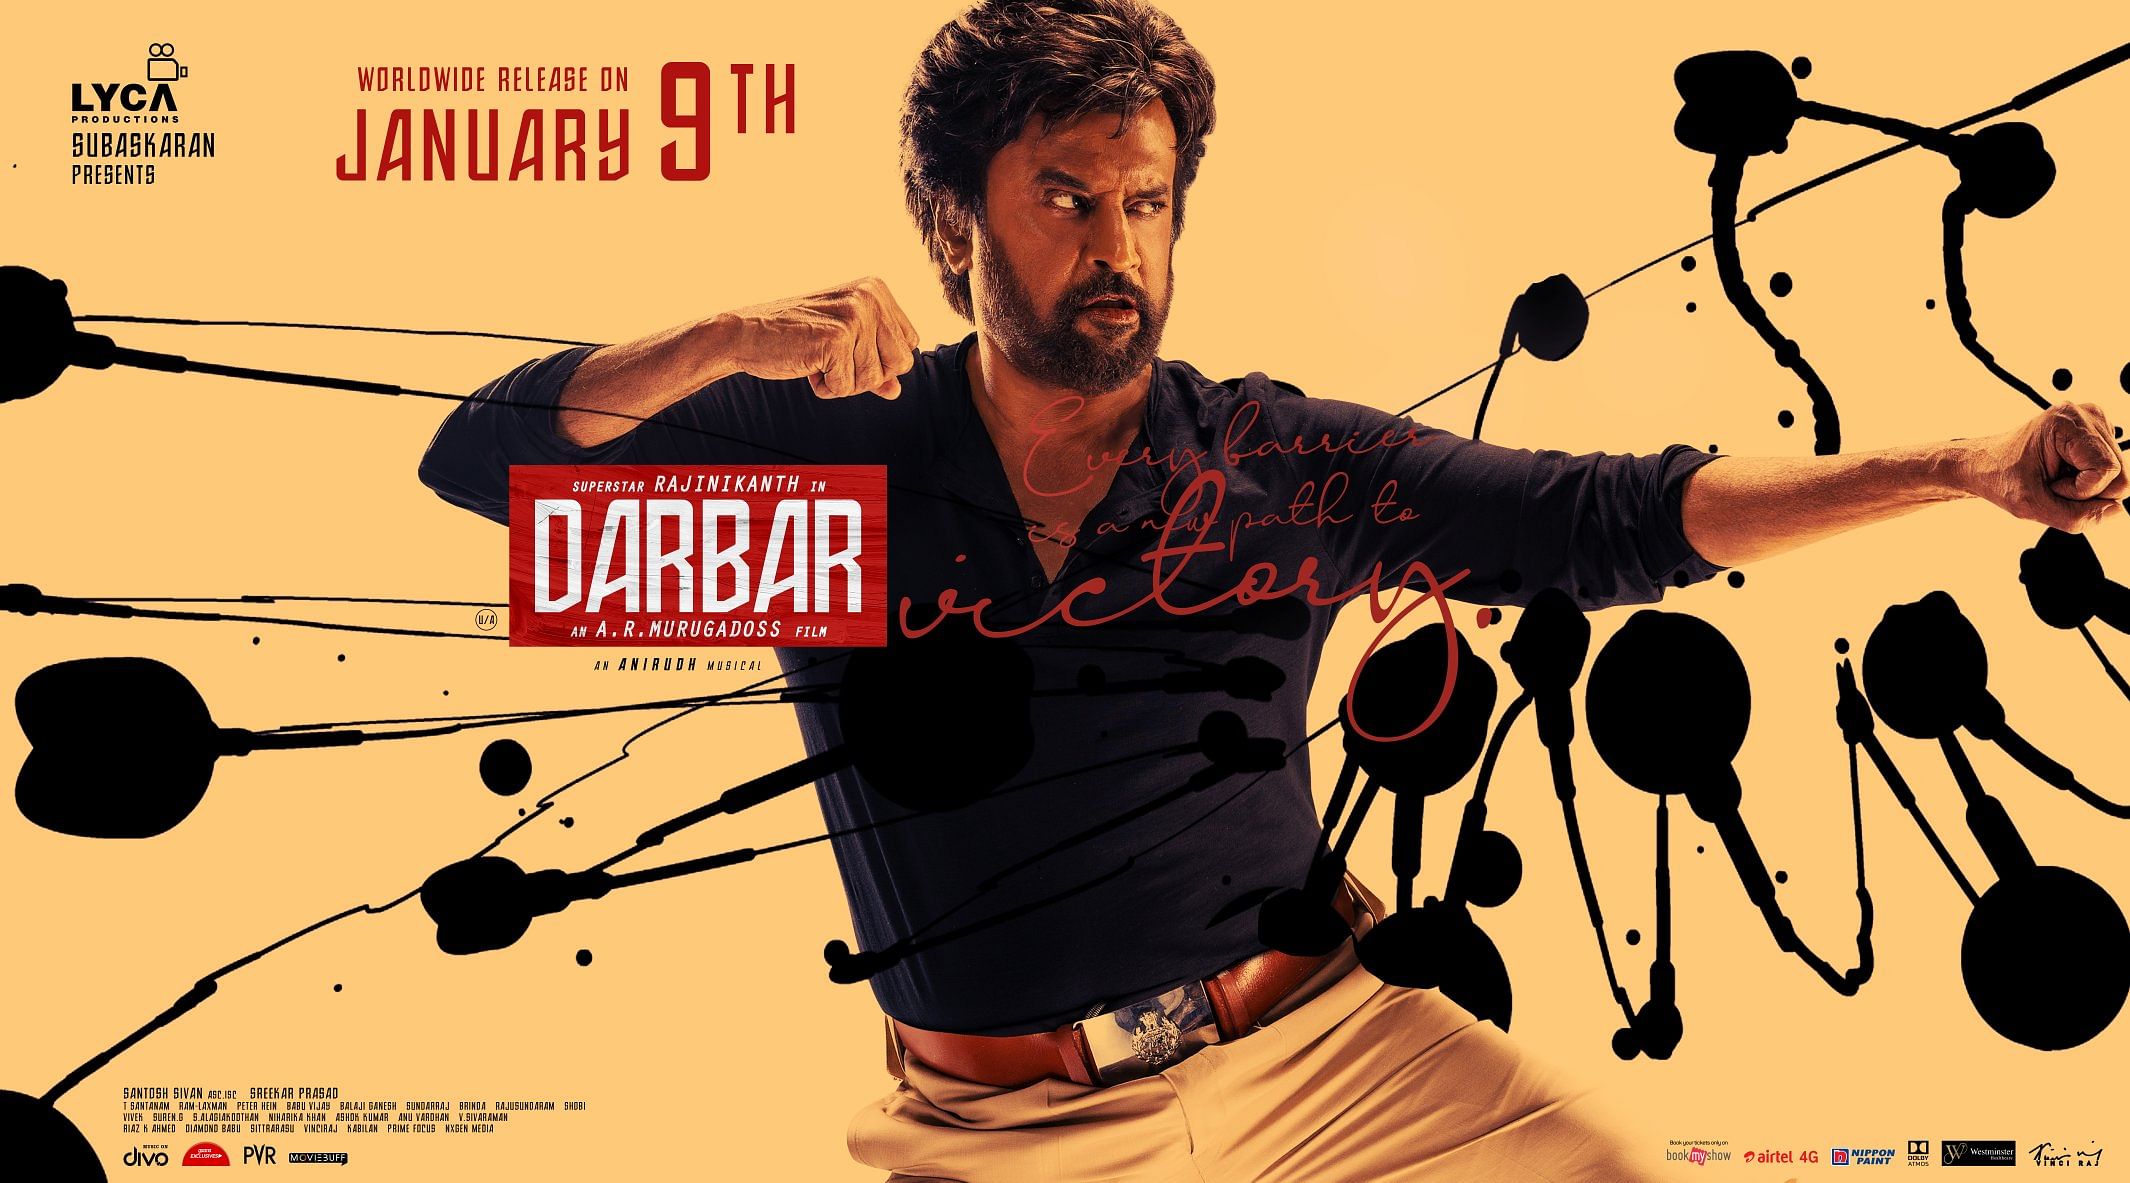 Darbar is also likely to set the Chennai box office on fire. As reported earlier, the opening day collections will most probably be between Rs 1.5 and Rs 2 crore. (Twitter Image/@LycaProductions)